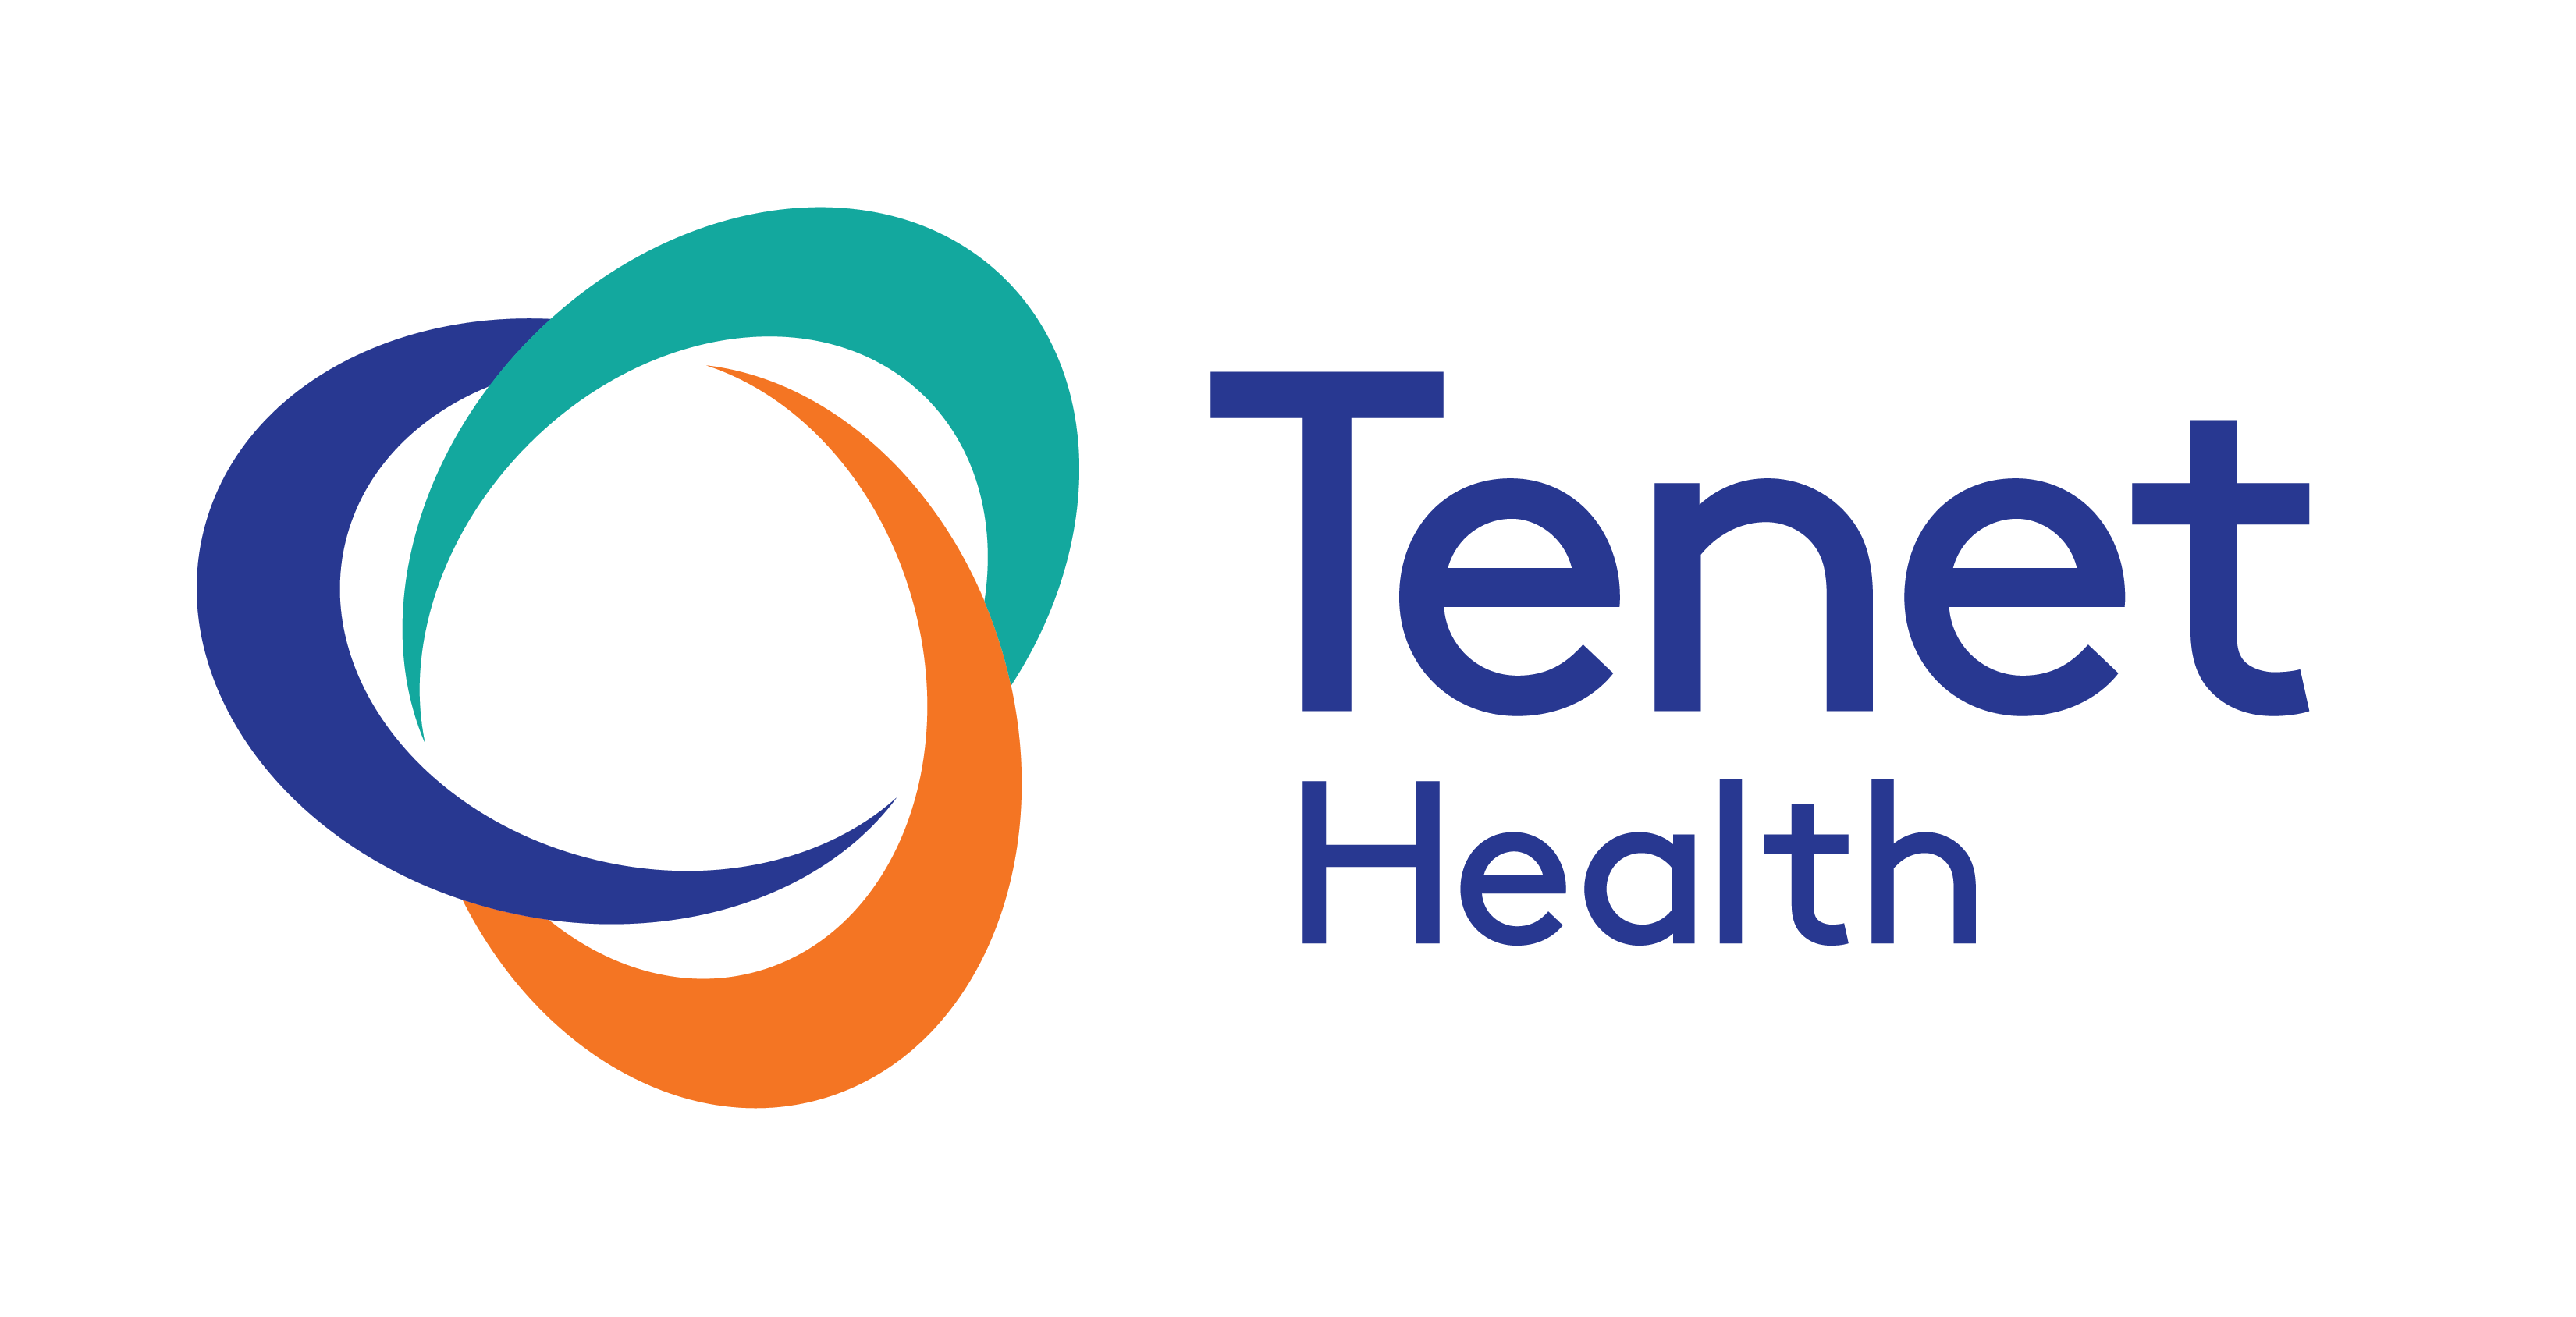 Tenet Healthcare Corporation is a for-profit multinational healthcare services company based in Dallas, Texas, United States. Through its brands, subsidiaries, joint ventures, and partnerships, including United Surgical Partners International, the company operates 65 hospitals and over 450 healthcare facilities.